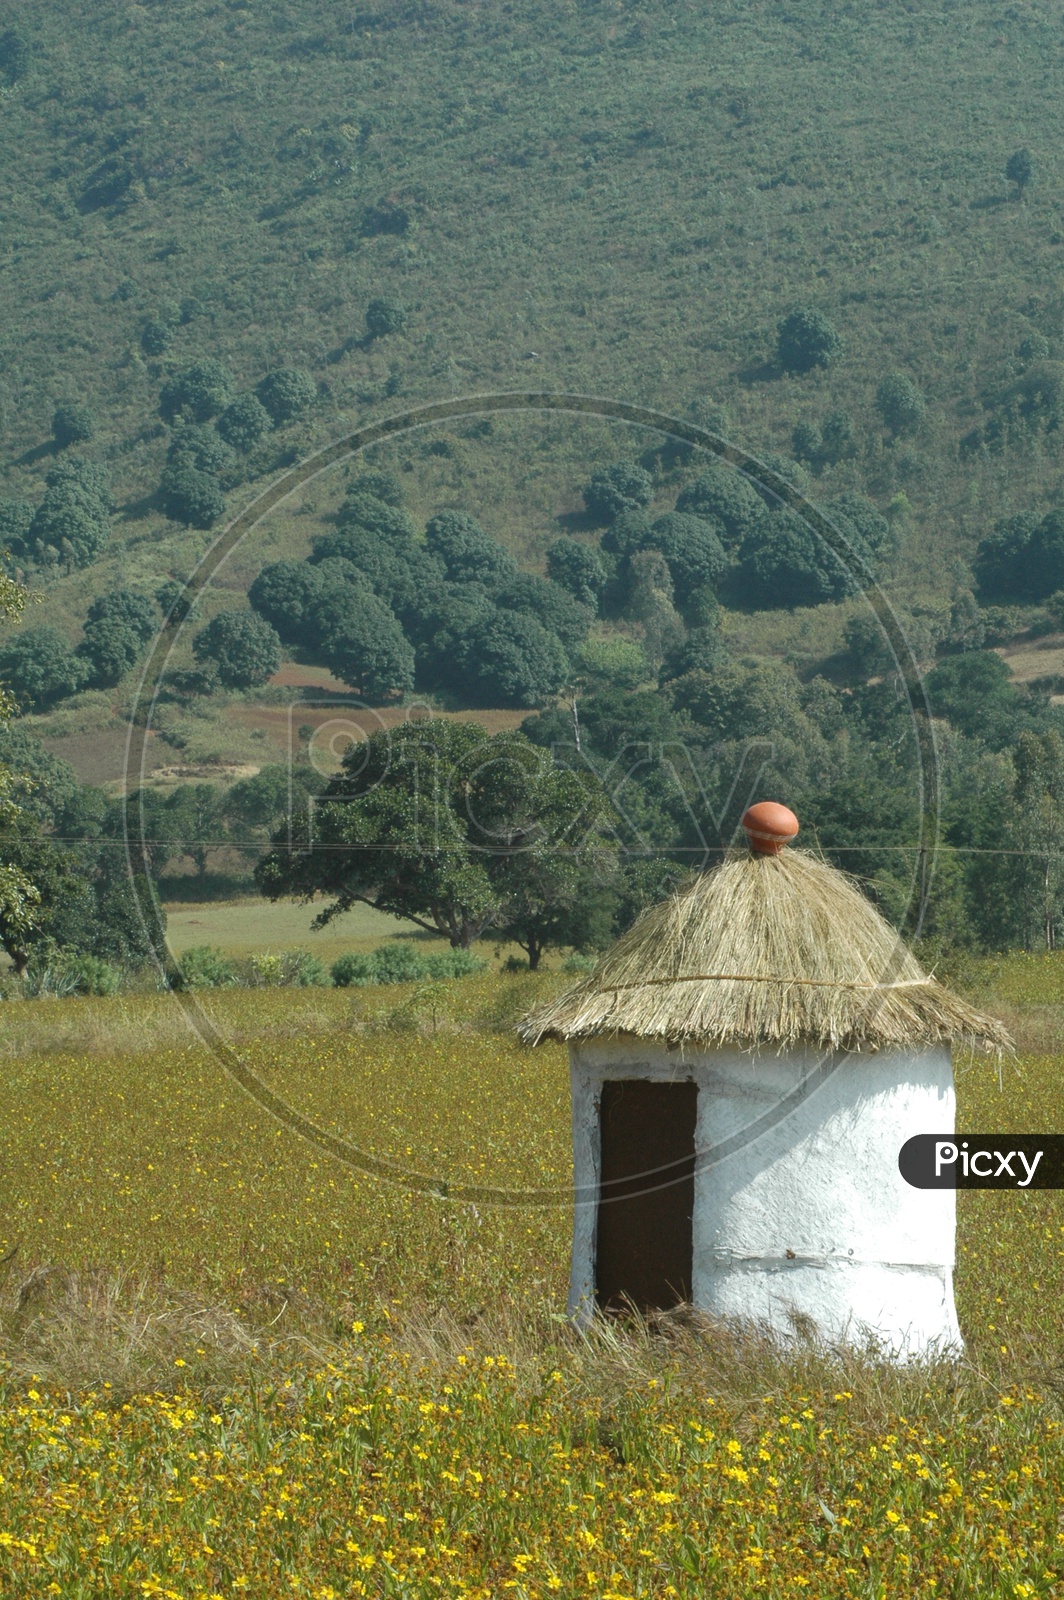 Thatched hut in the fields of Araku valley